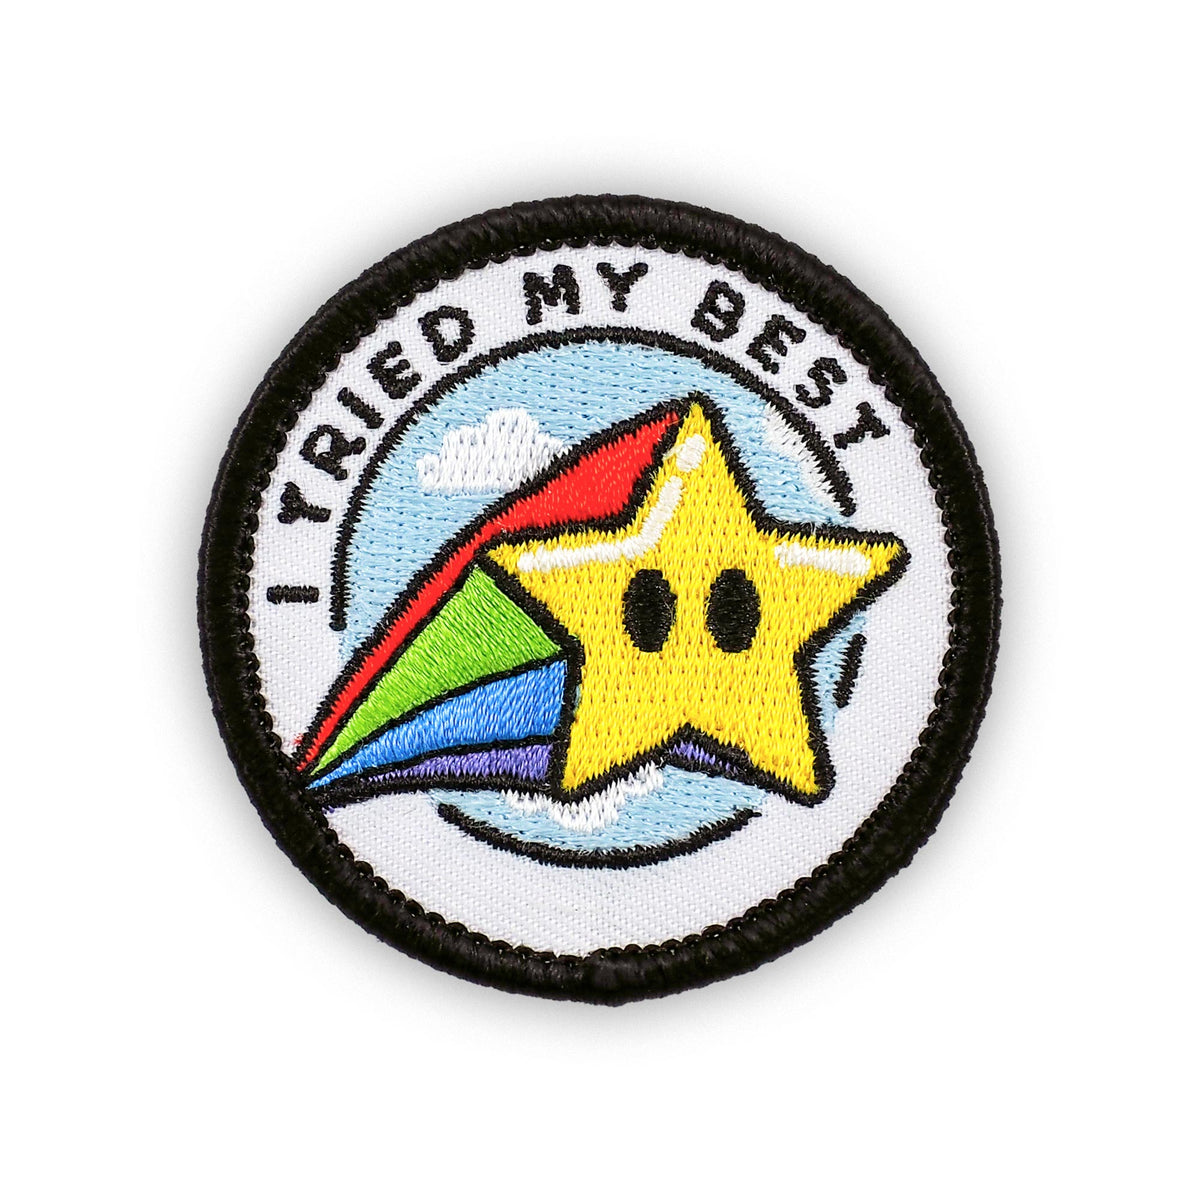 I Tried My Best adulting merit badge patch for adults